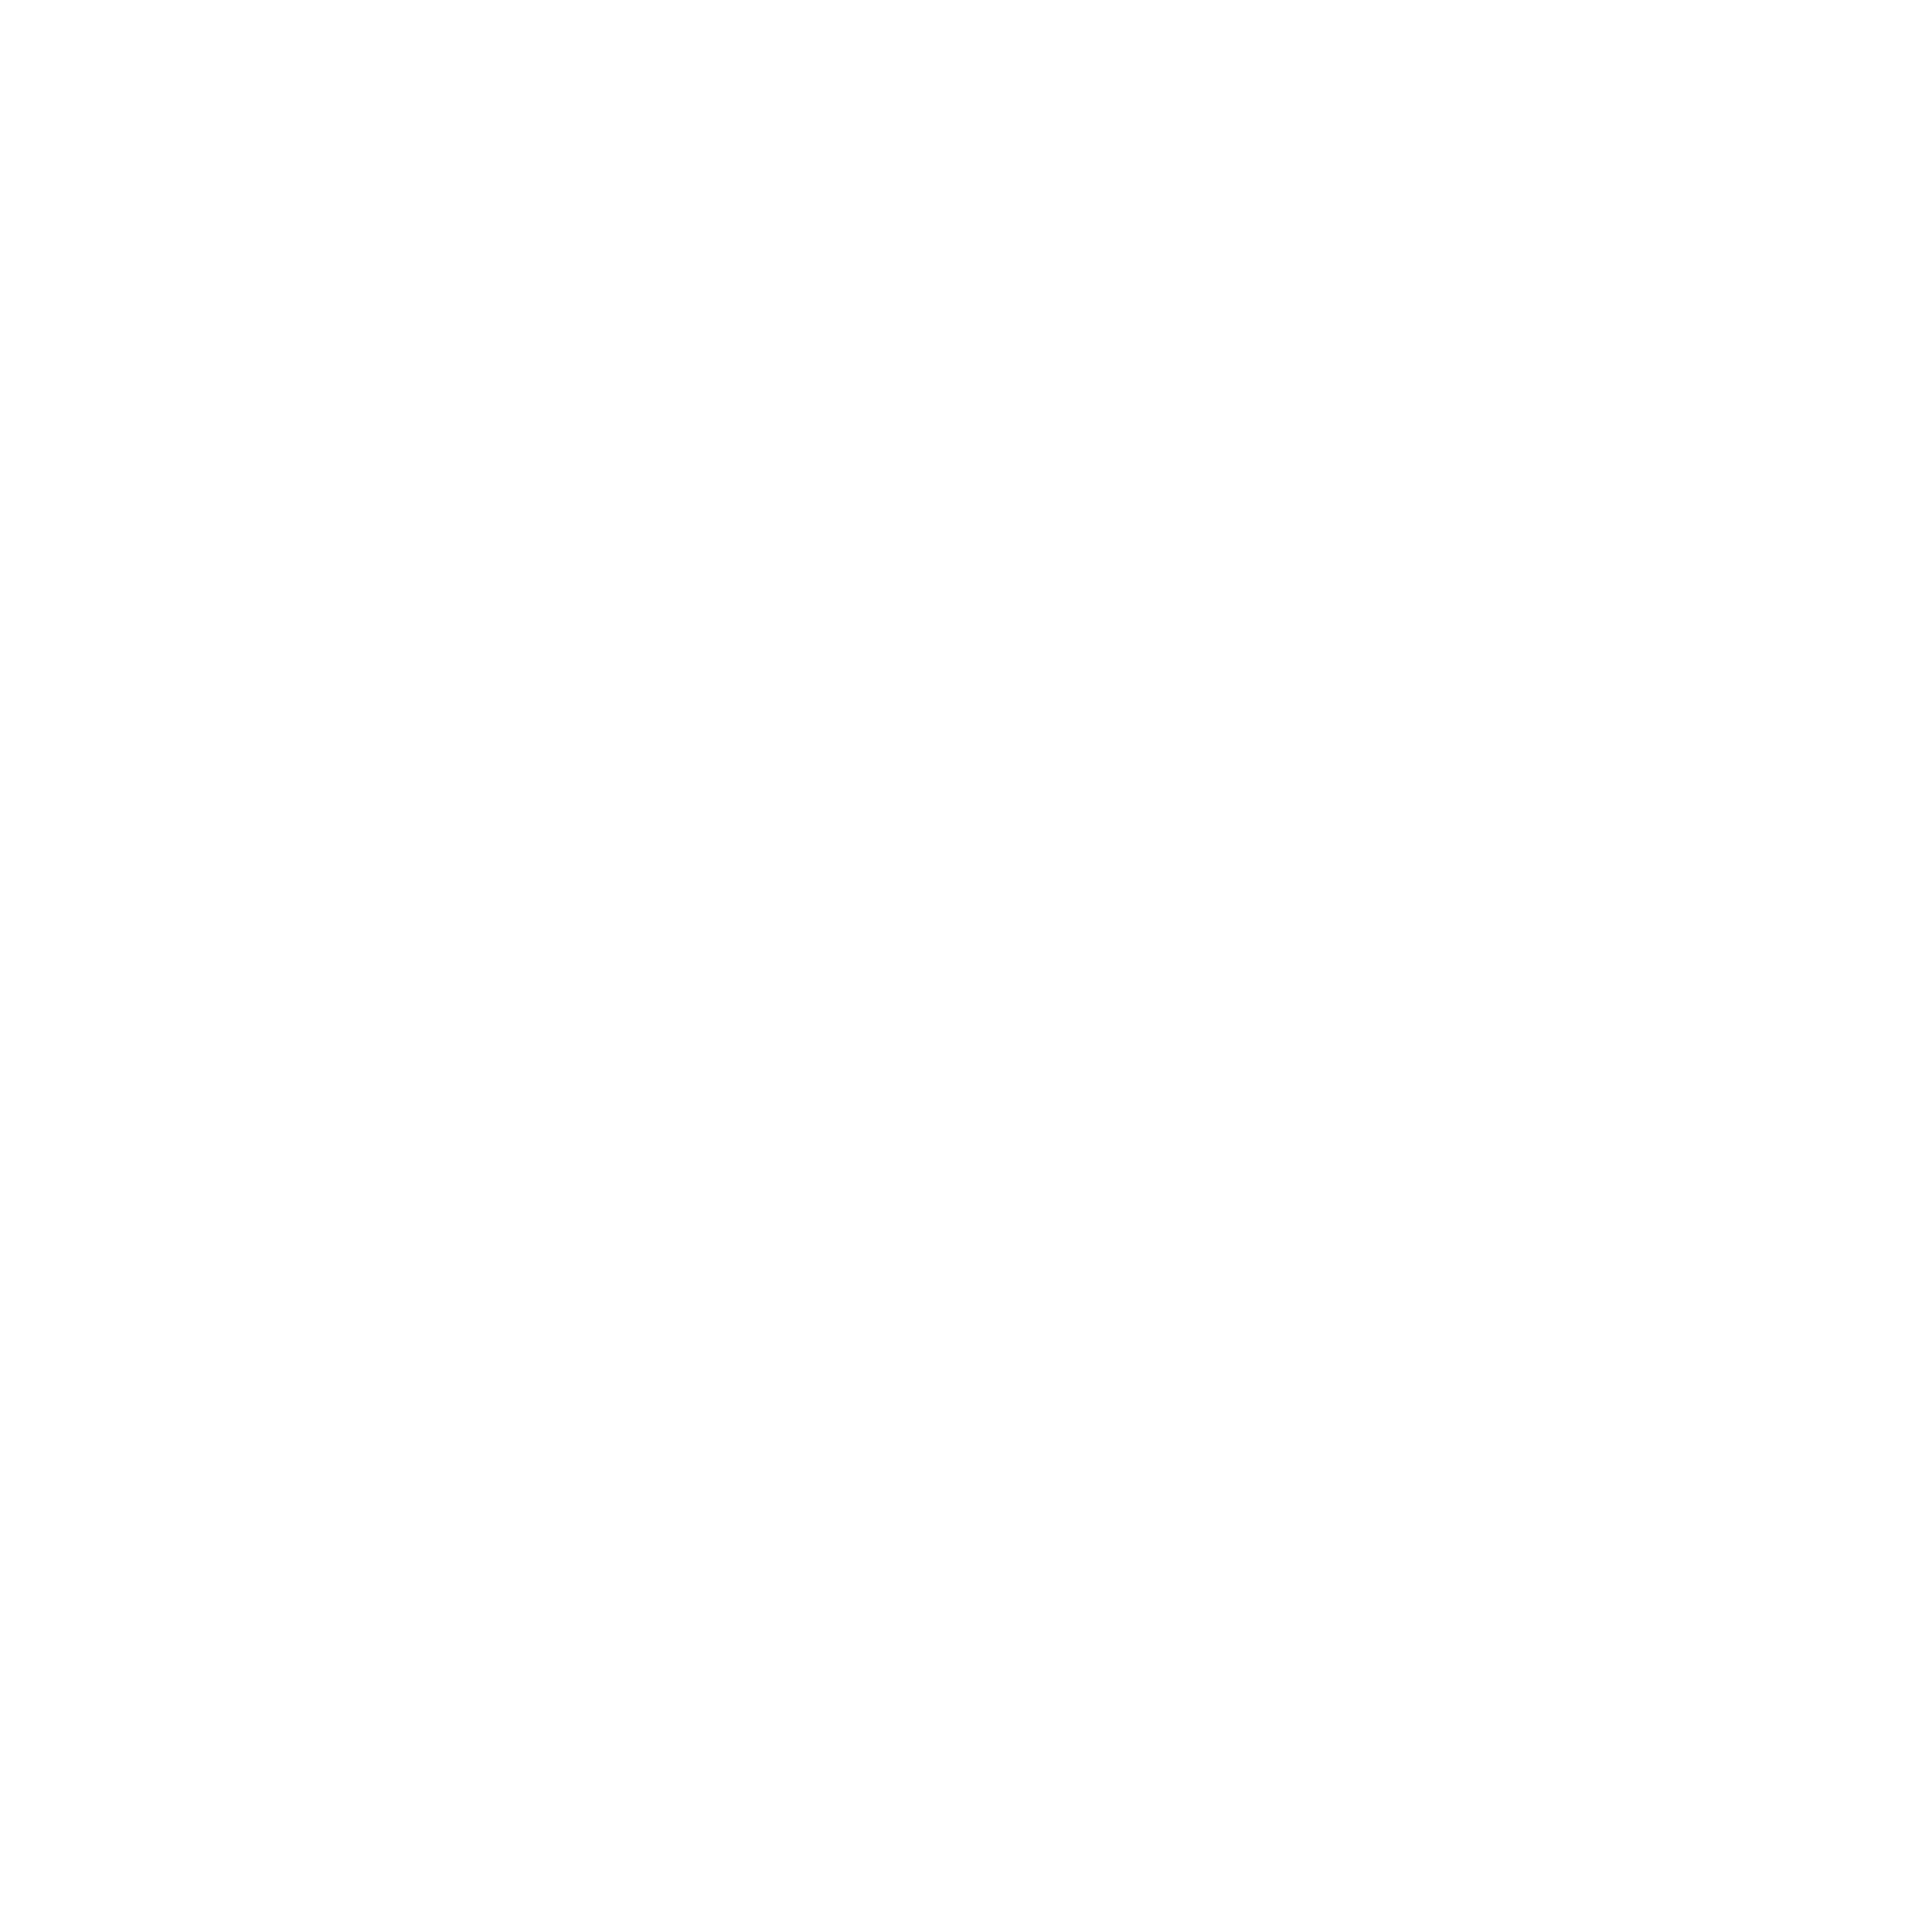 The Black Love Experience